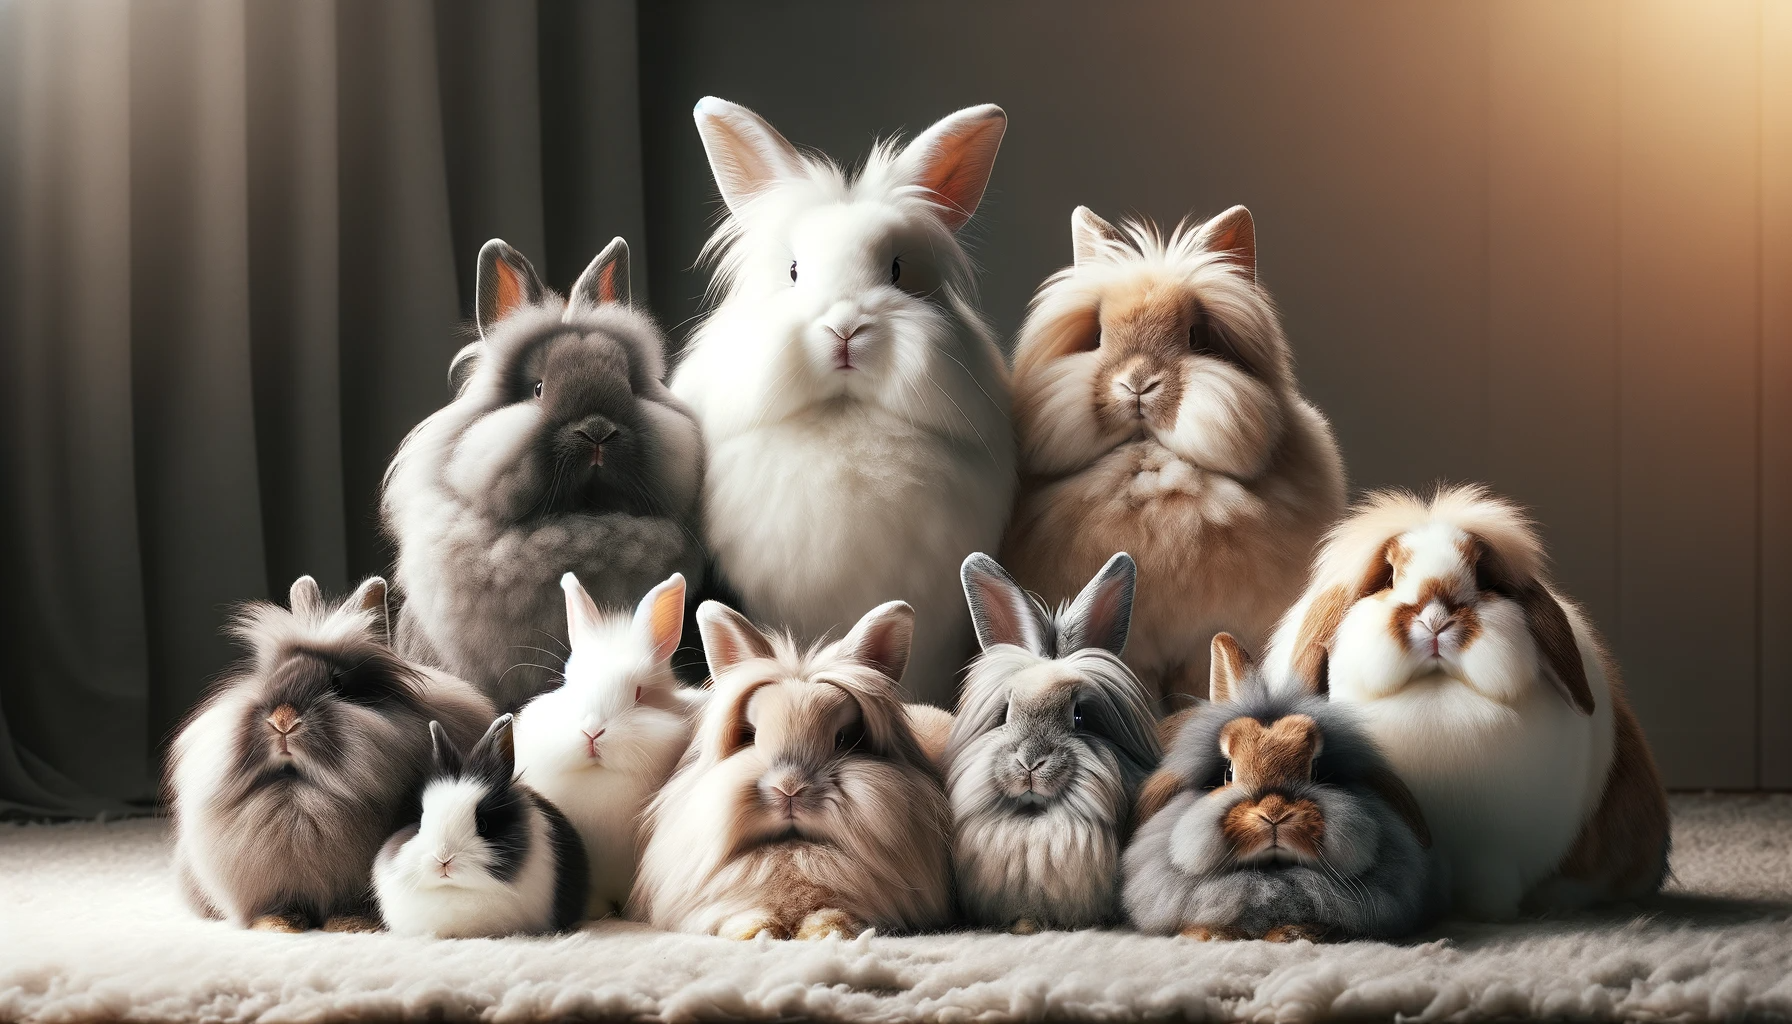 7 Fluffiest Rabbit Breeds That Are Cute